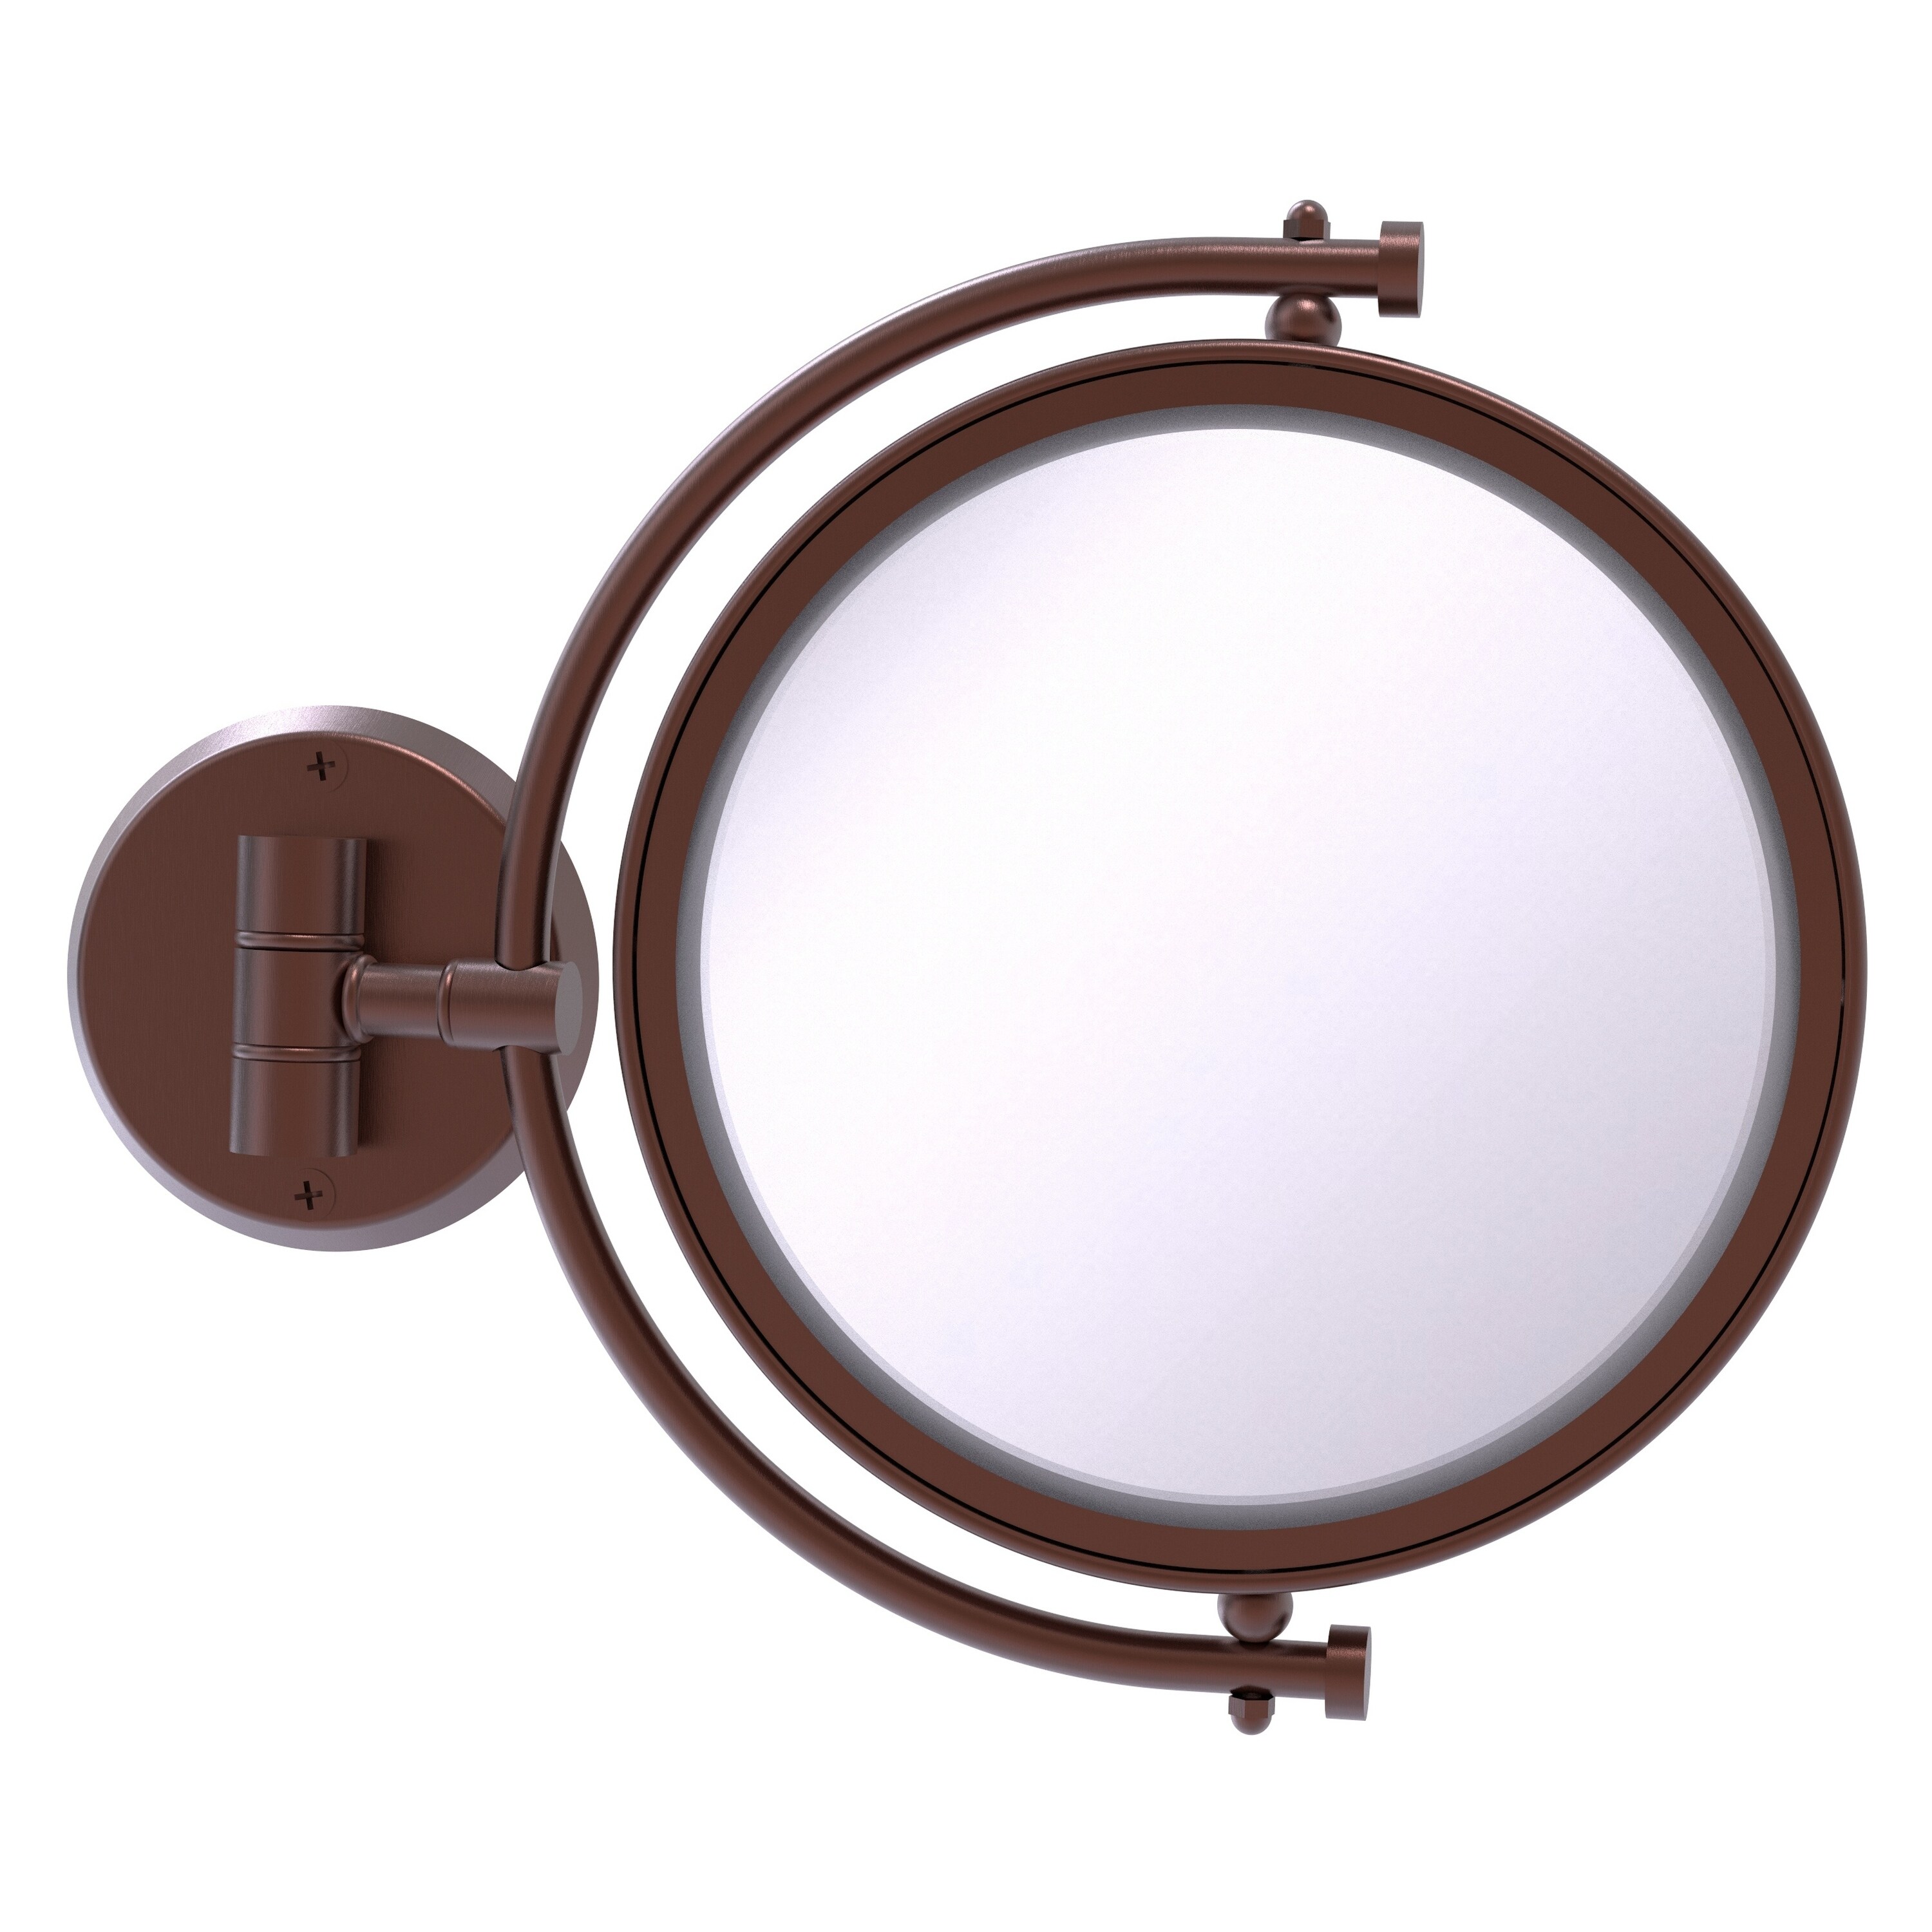 8-in x 10-in Antique Copper Double-sided 2X Magnifying Wall-mounted Vanity Mirror | - Allied Brass WM-4/2X-CA